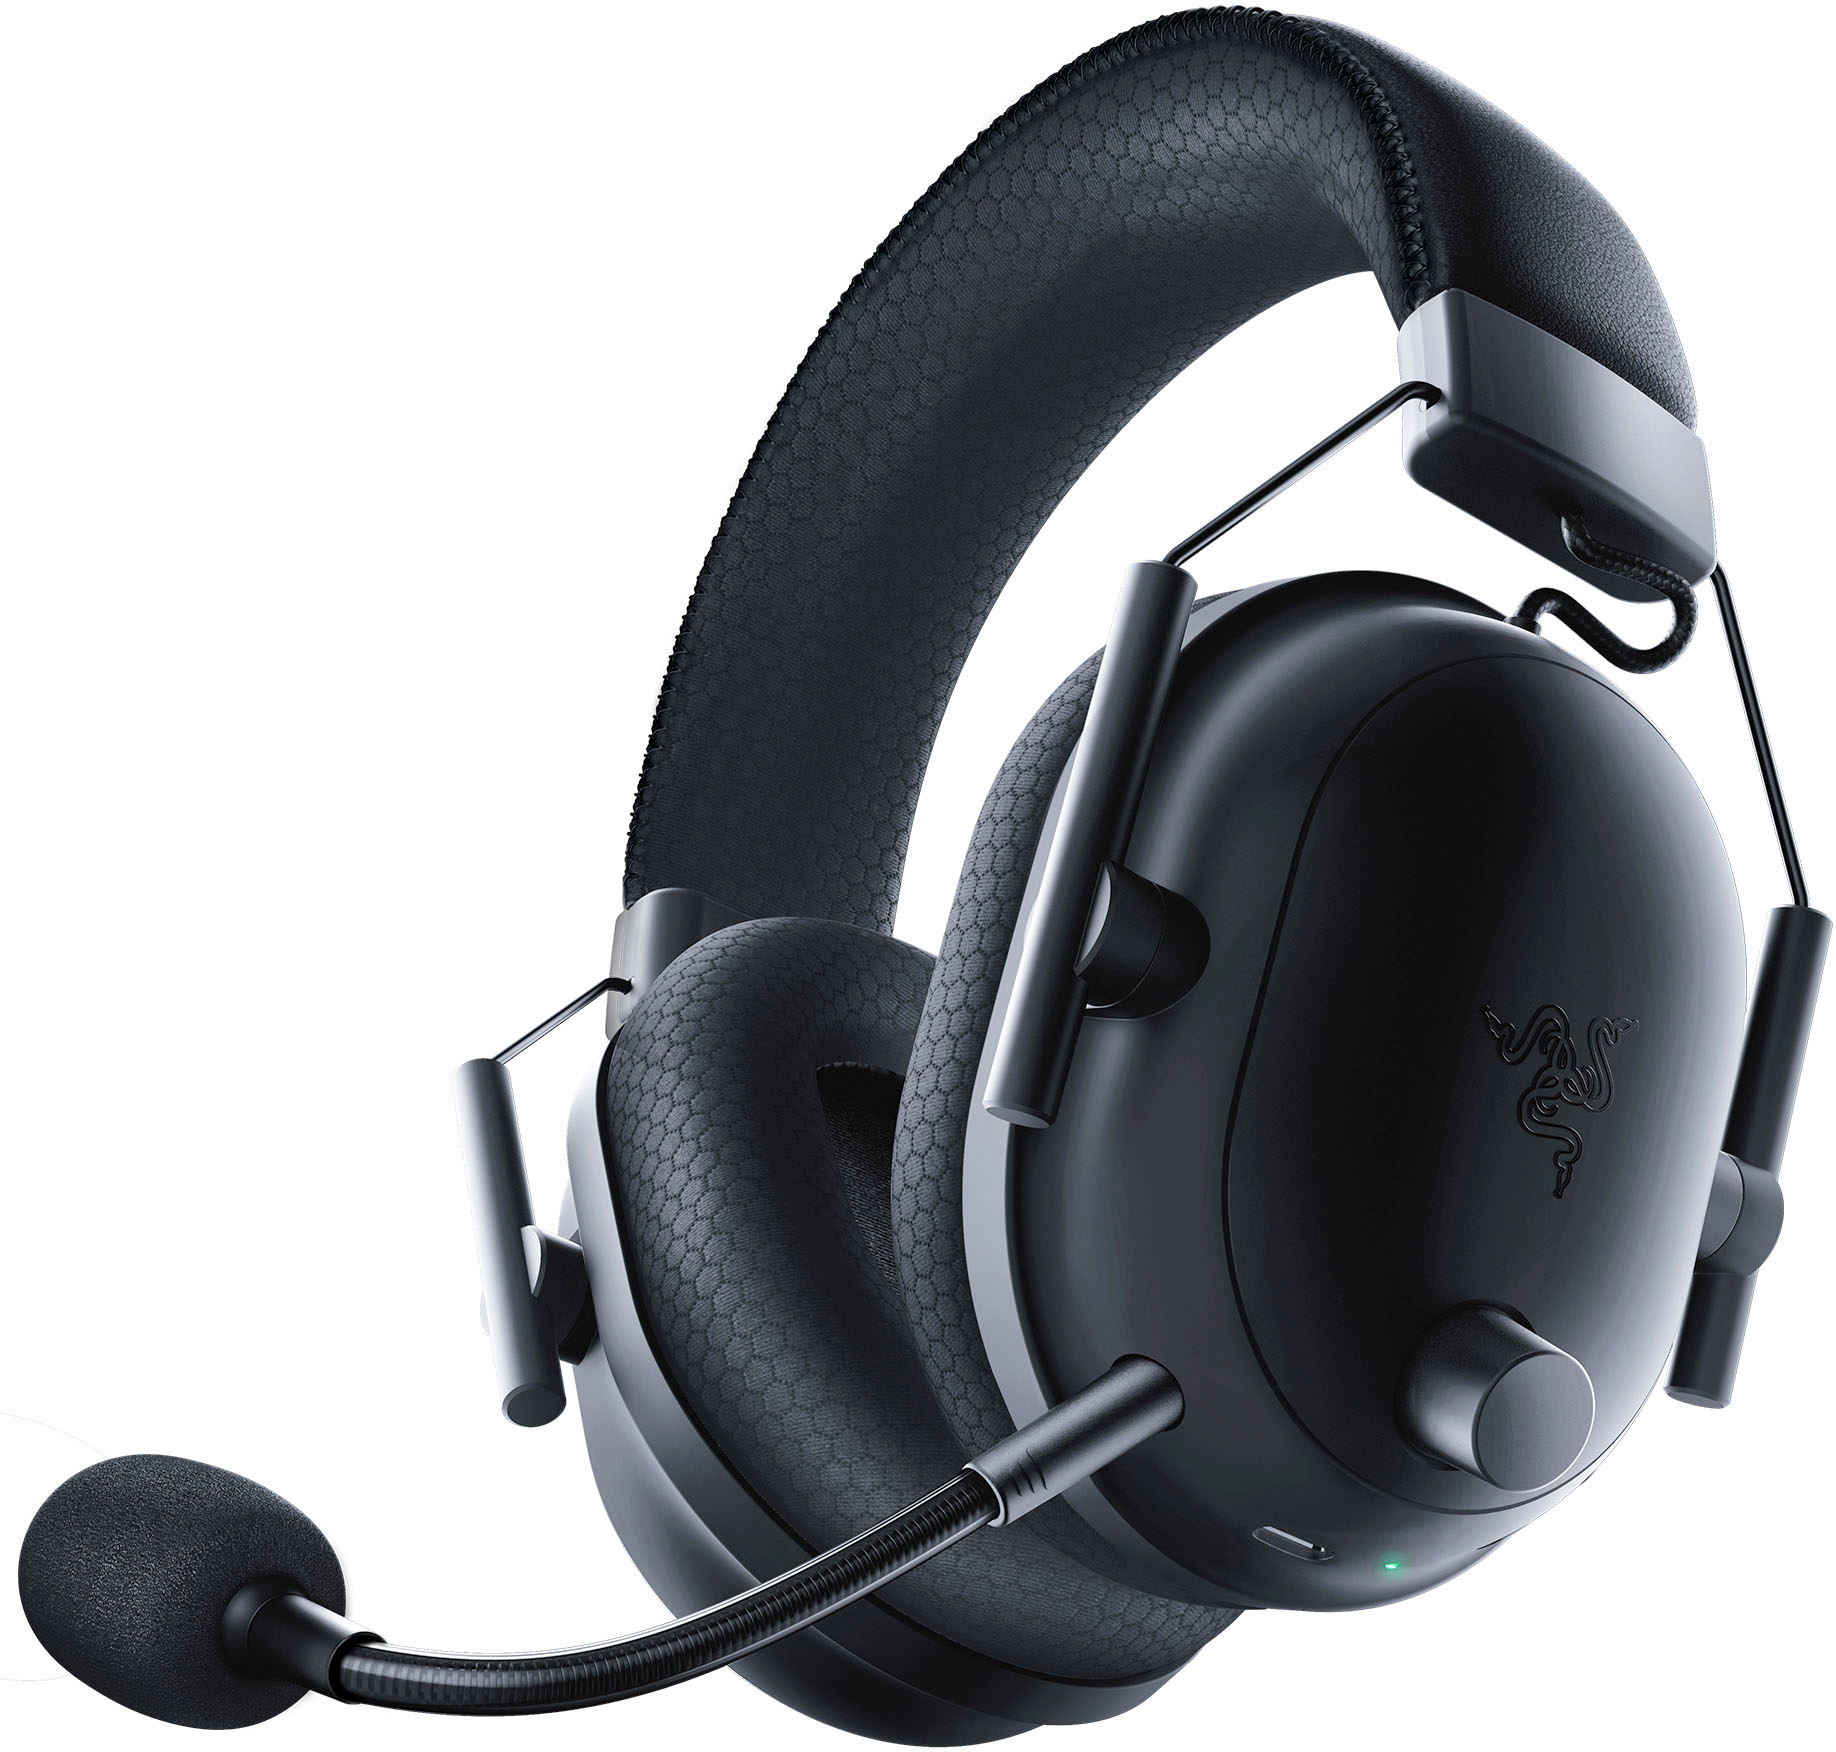 Angle View: Astro Gaming - A10 Gen 2 Wired Gaming Headset for PC - Gray